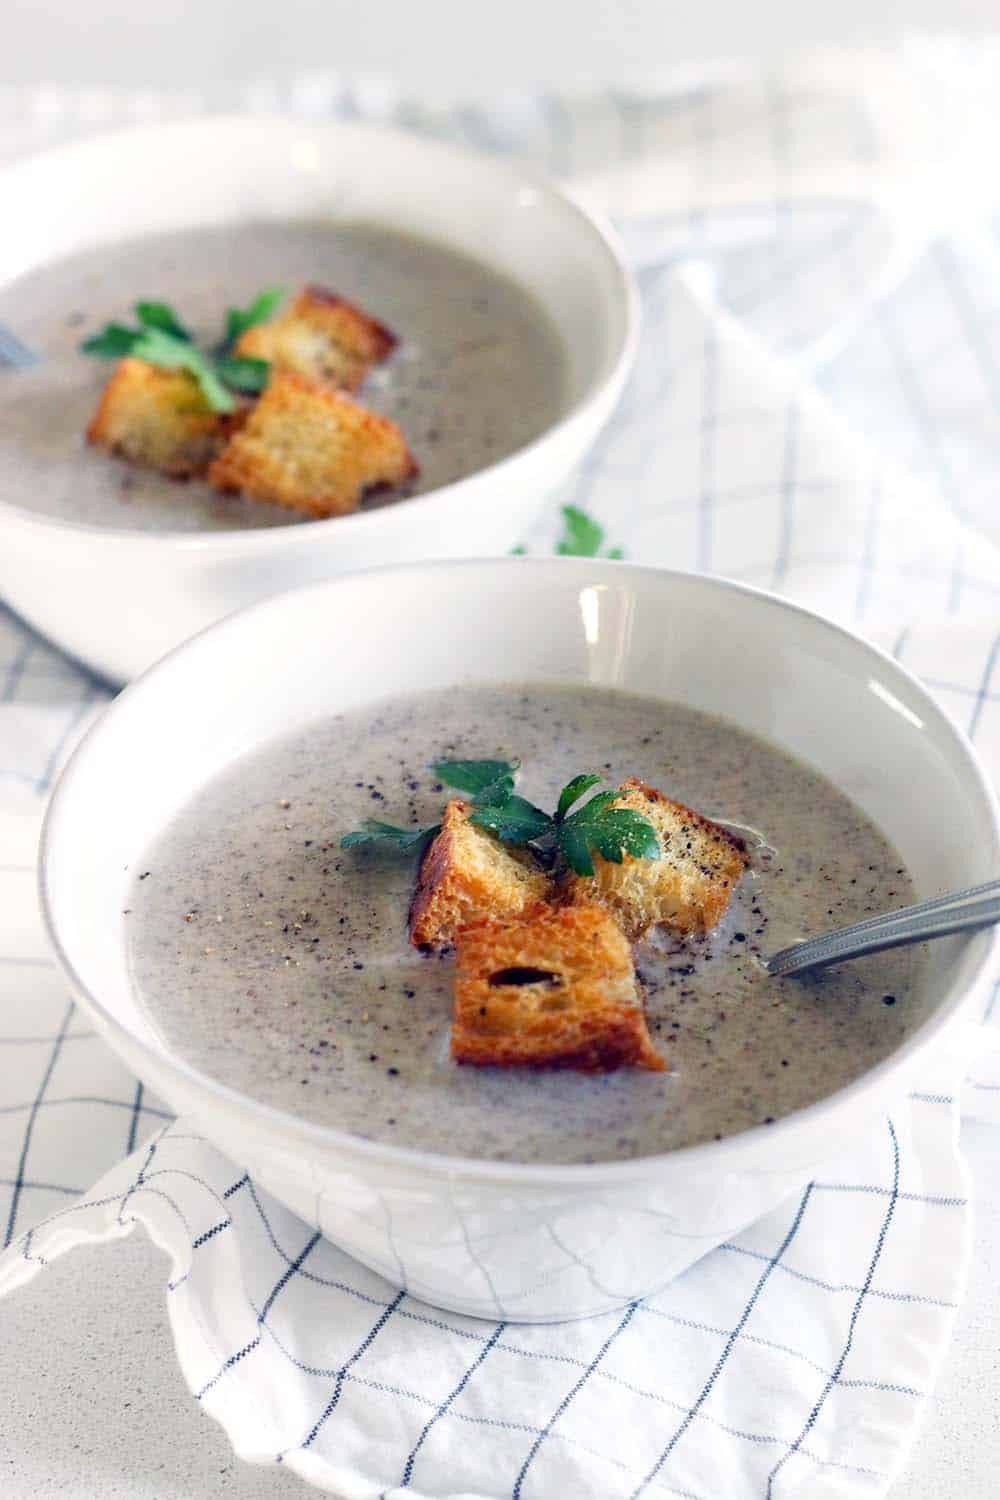 This Mushroom Brie Soup is decadent, rich, earthy, creamy, and so easy to make. Browned butter makes the flavor extra deep for this one pot, vegetarian recipe.